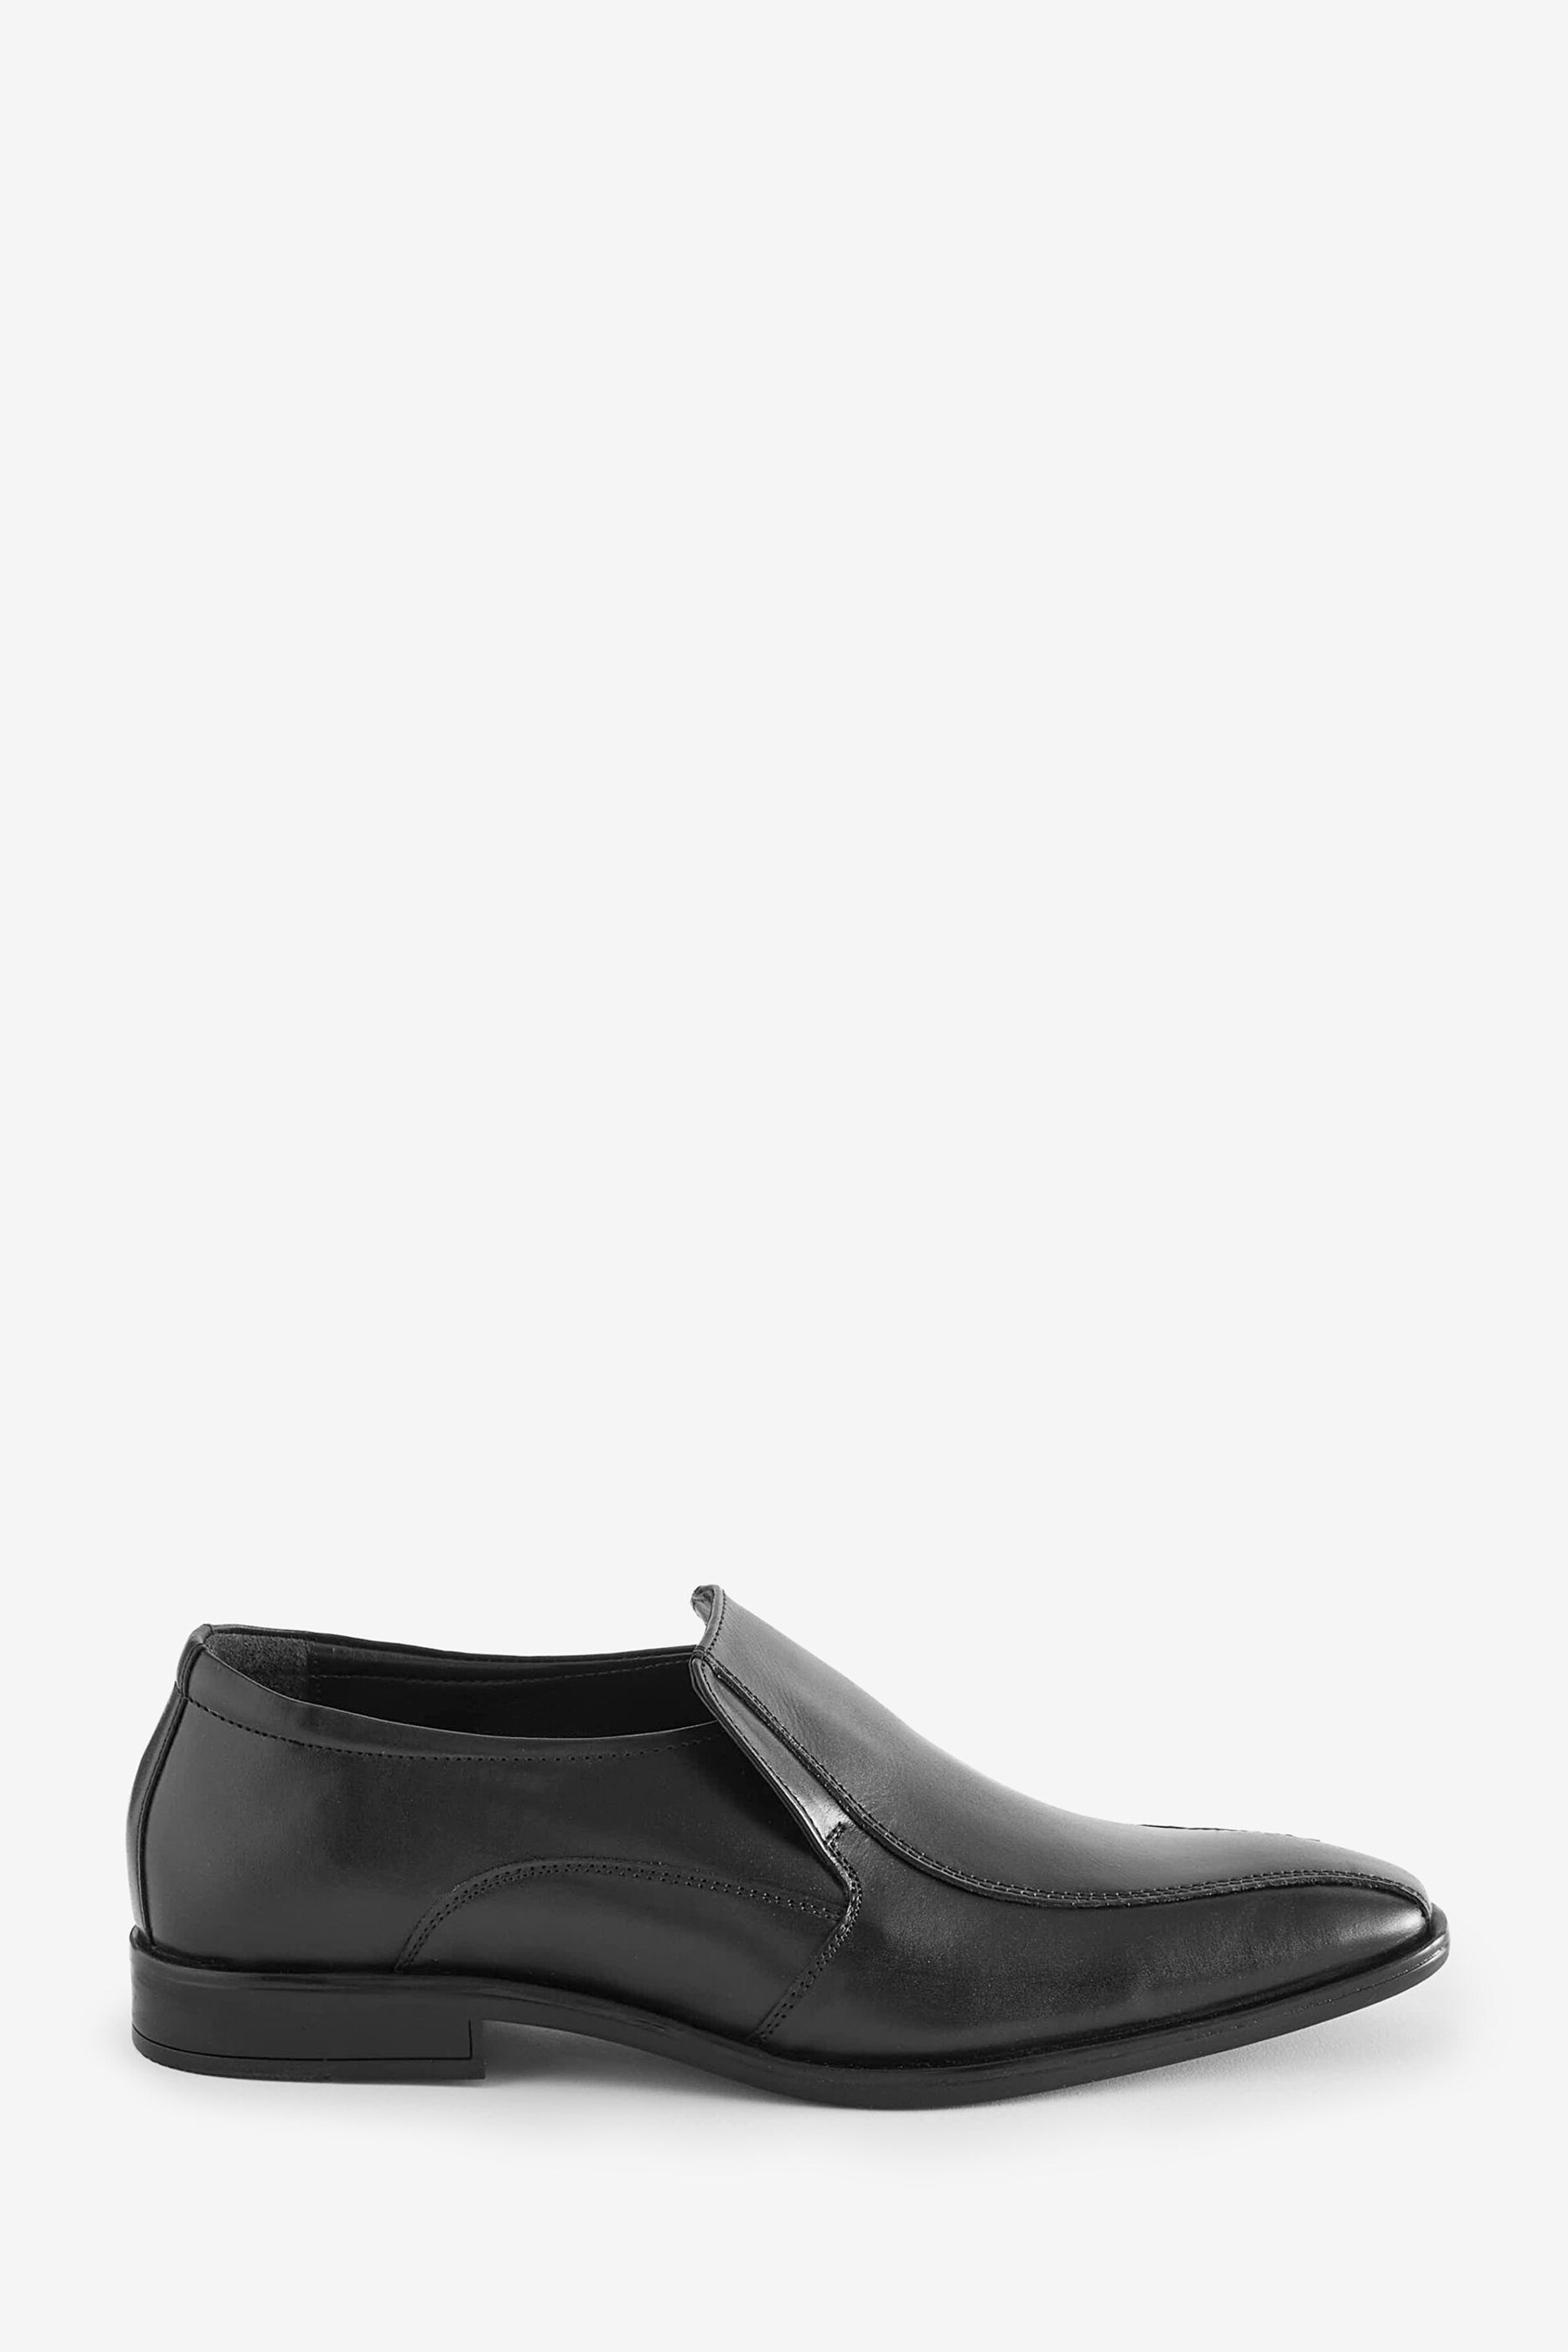 Lotus Black Leather Loafers - Image 1 of 5